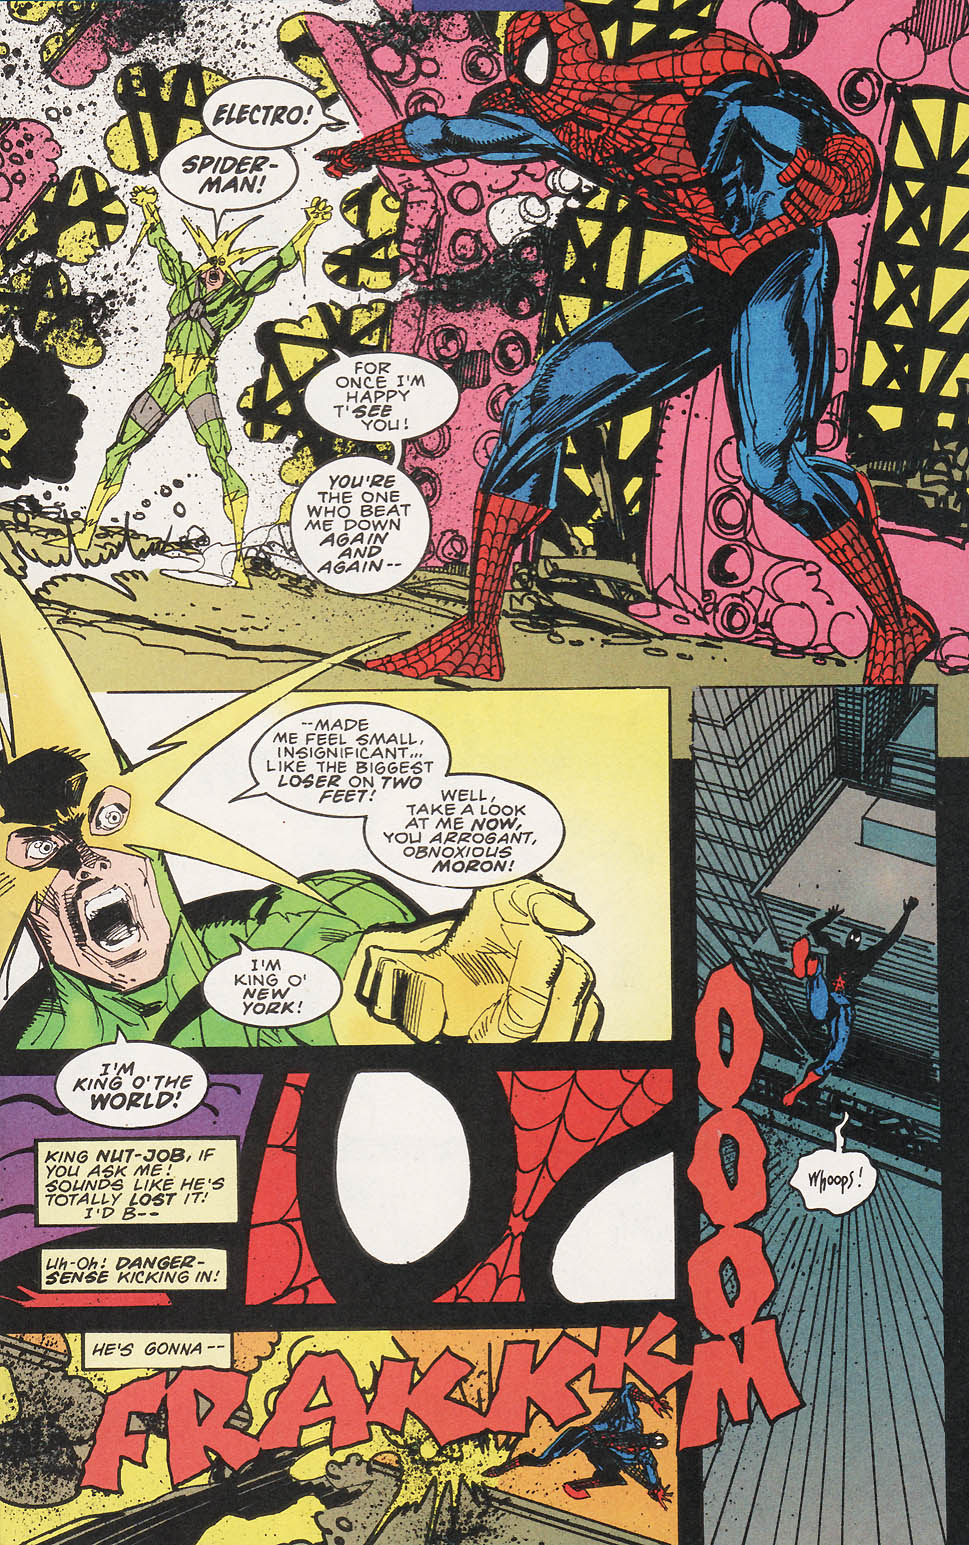 Read online Spider-Man (1990) comic -  Issue #40 - Light The Night Part 3 of 3 - 9